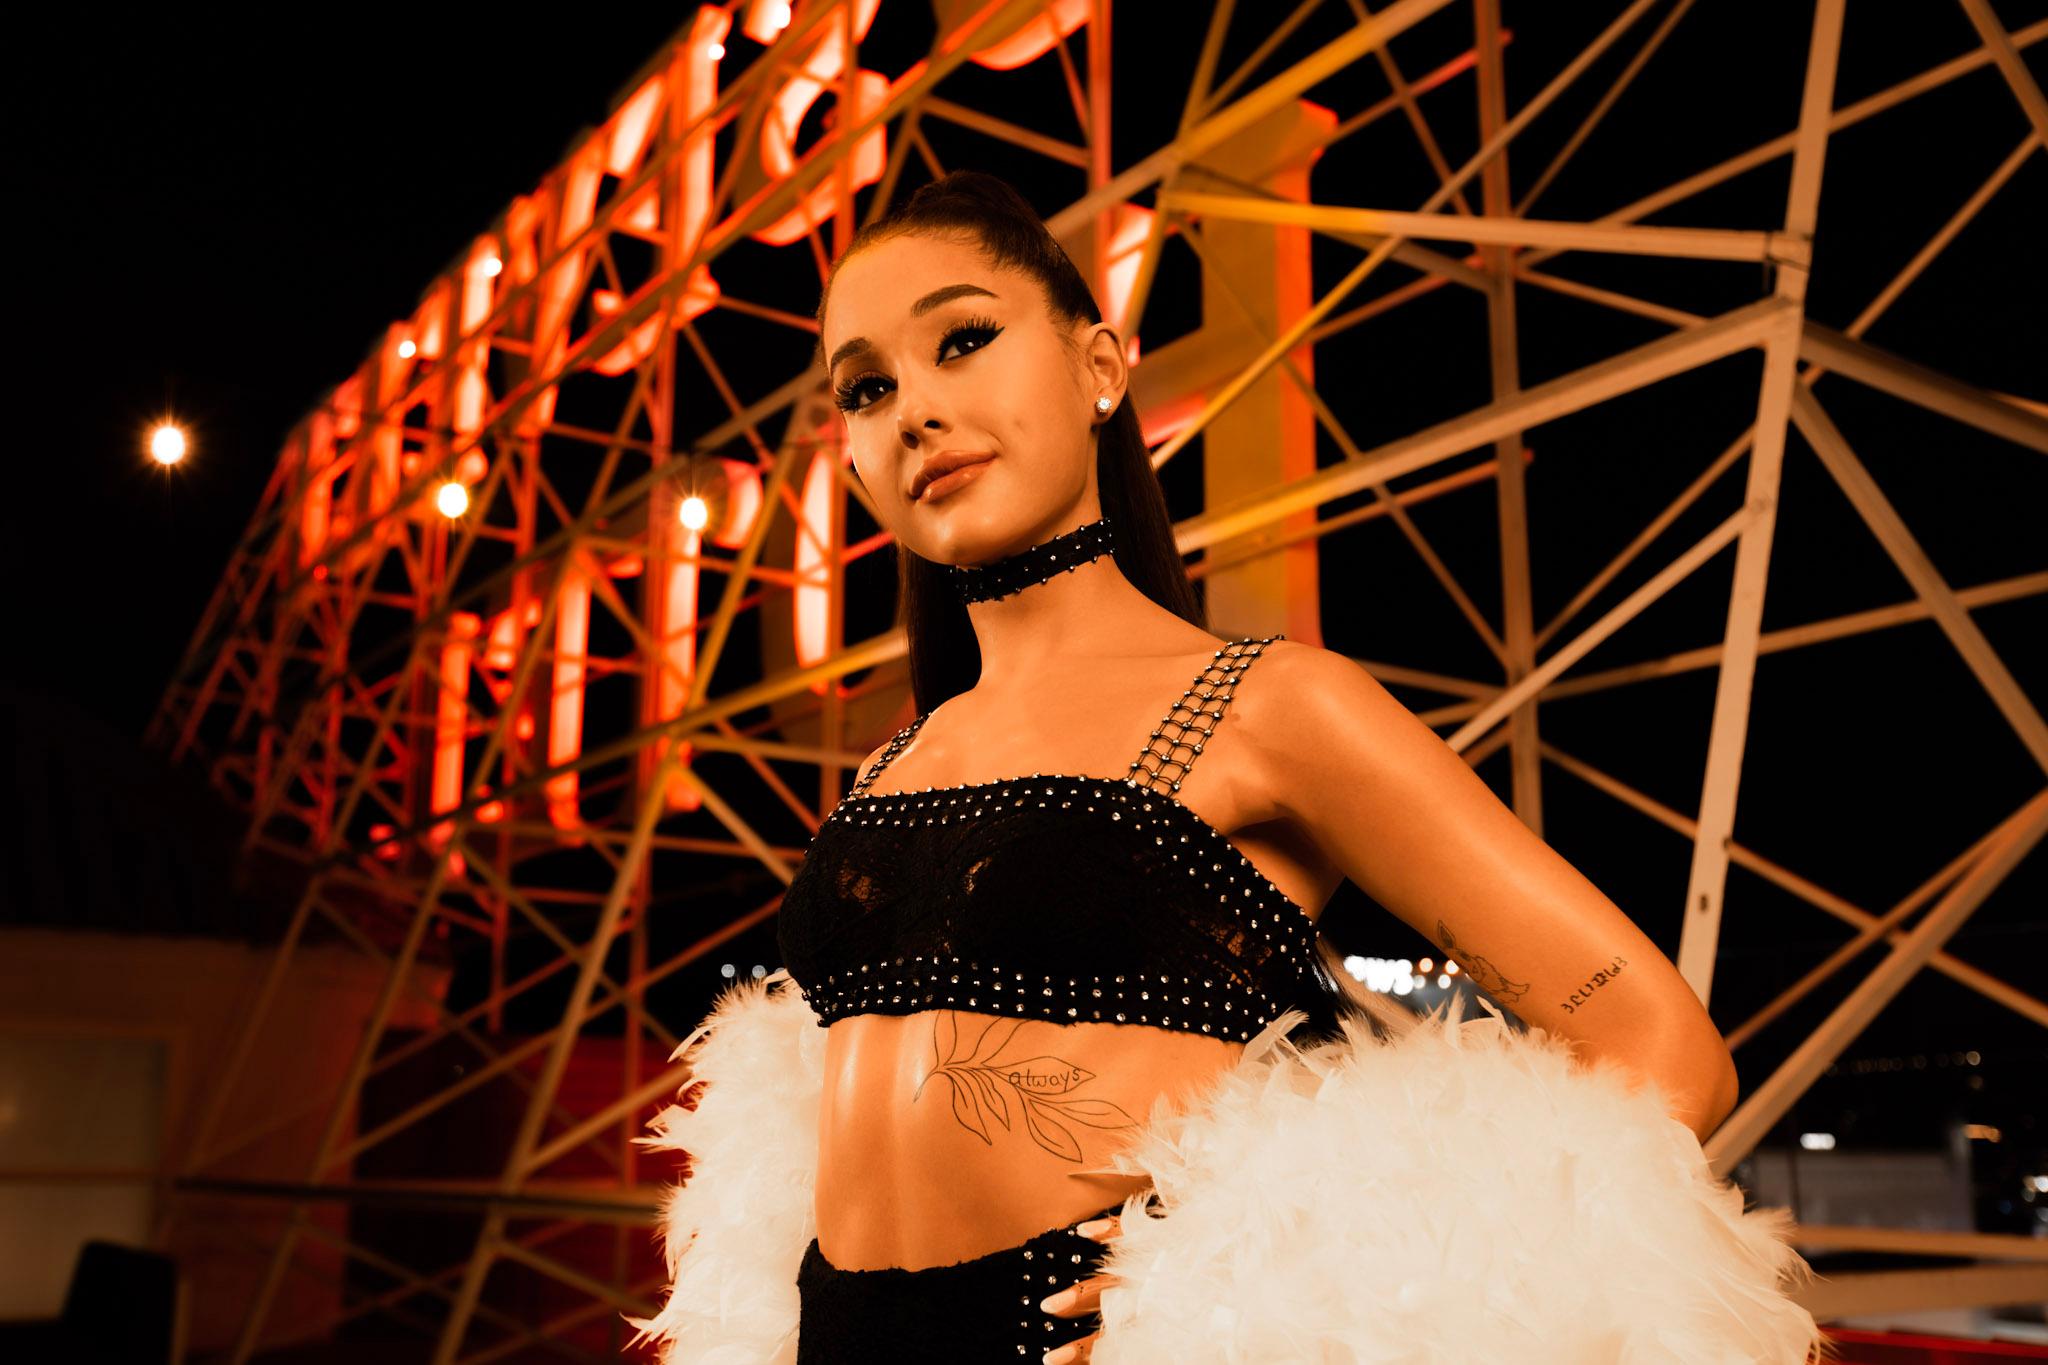 Seeing double Ariana Grande waxwork figure unveiled at Madame Tussauds Hollywood